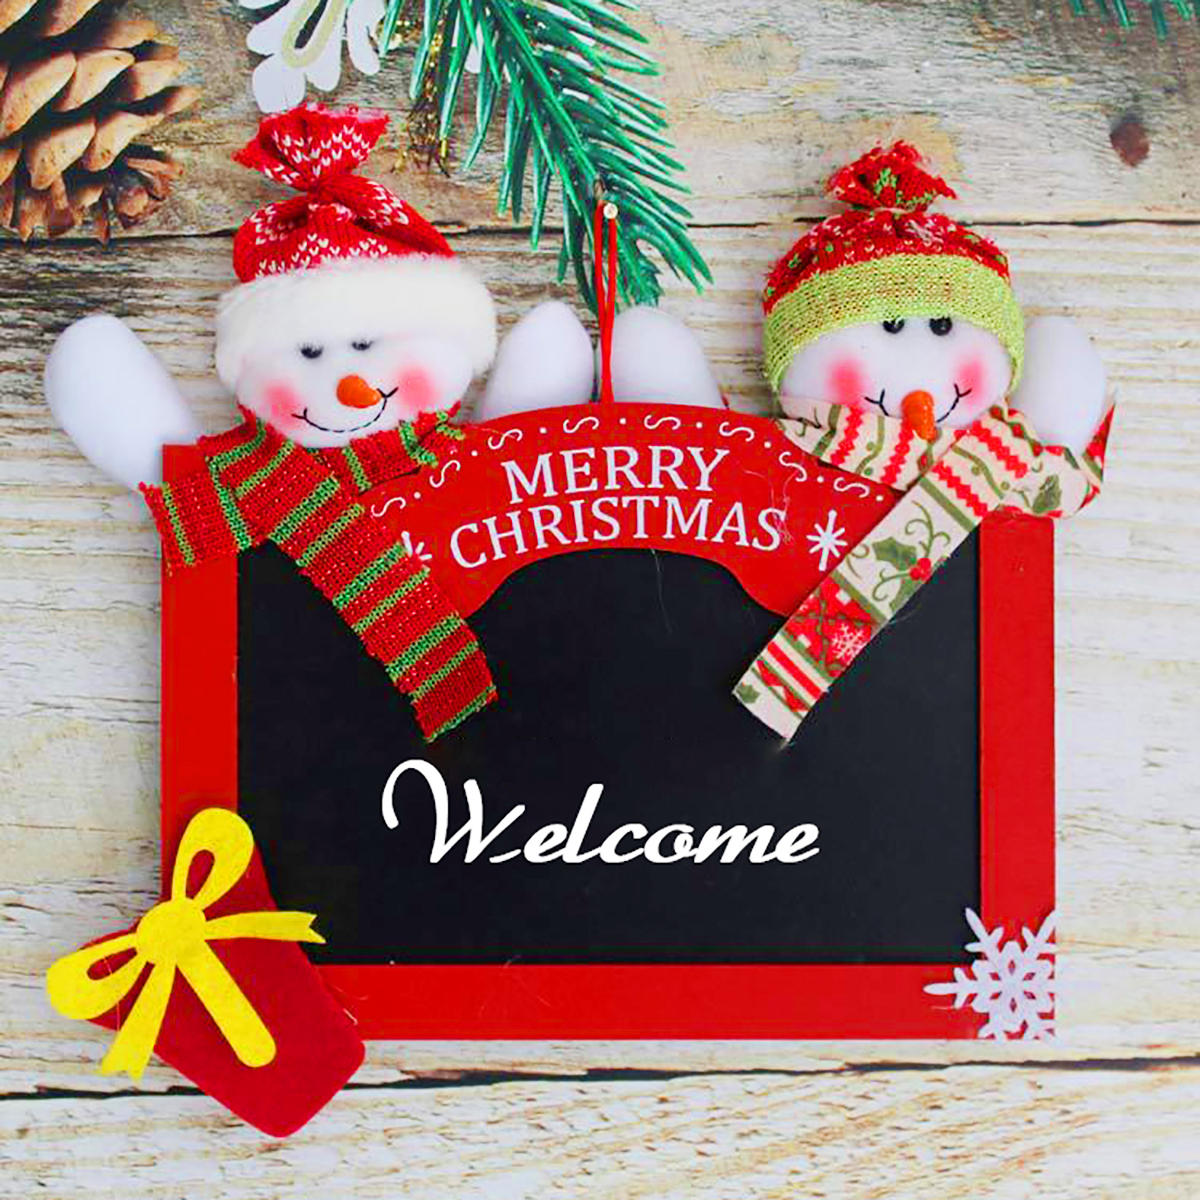 Merry-Christmas-Hanging-Sign-Wooden-Square-Blackboard-Wall-Door-Decoration-Hanging-Tags-for-DIY-Xmas-1904791-4